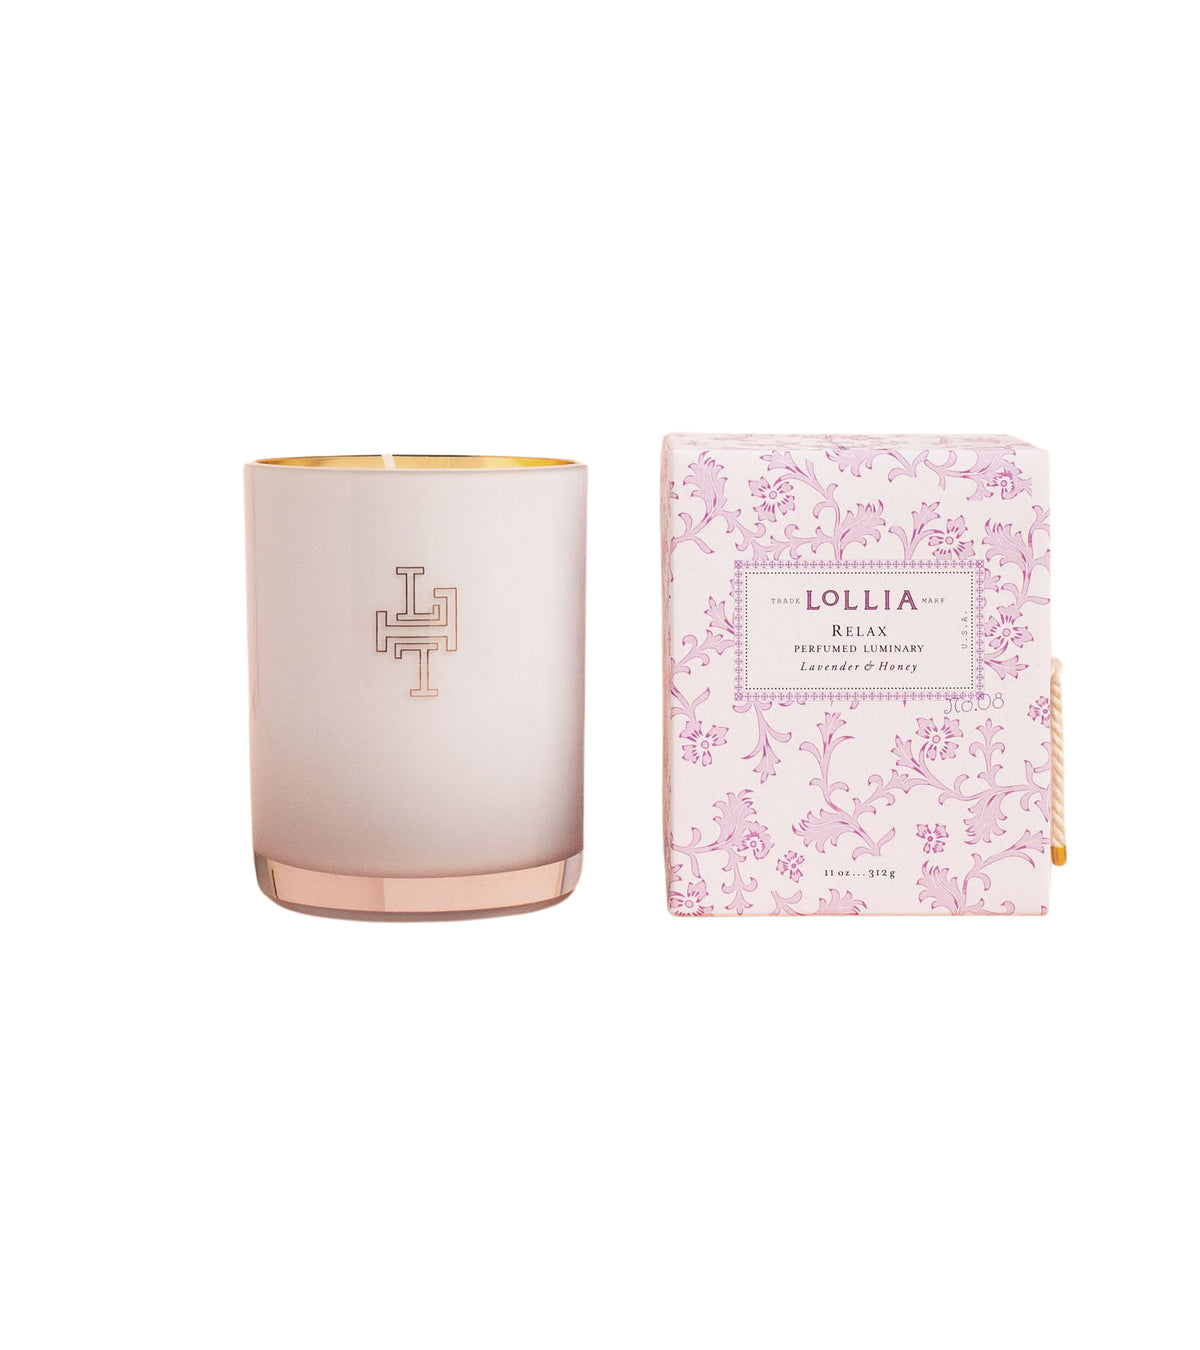 Lollia Relax No. 08 Luminary Candle